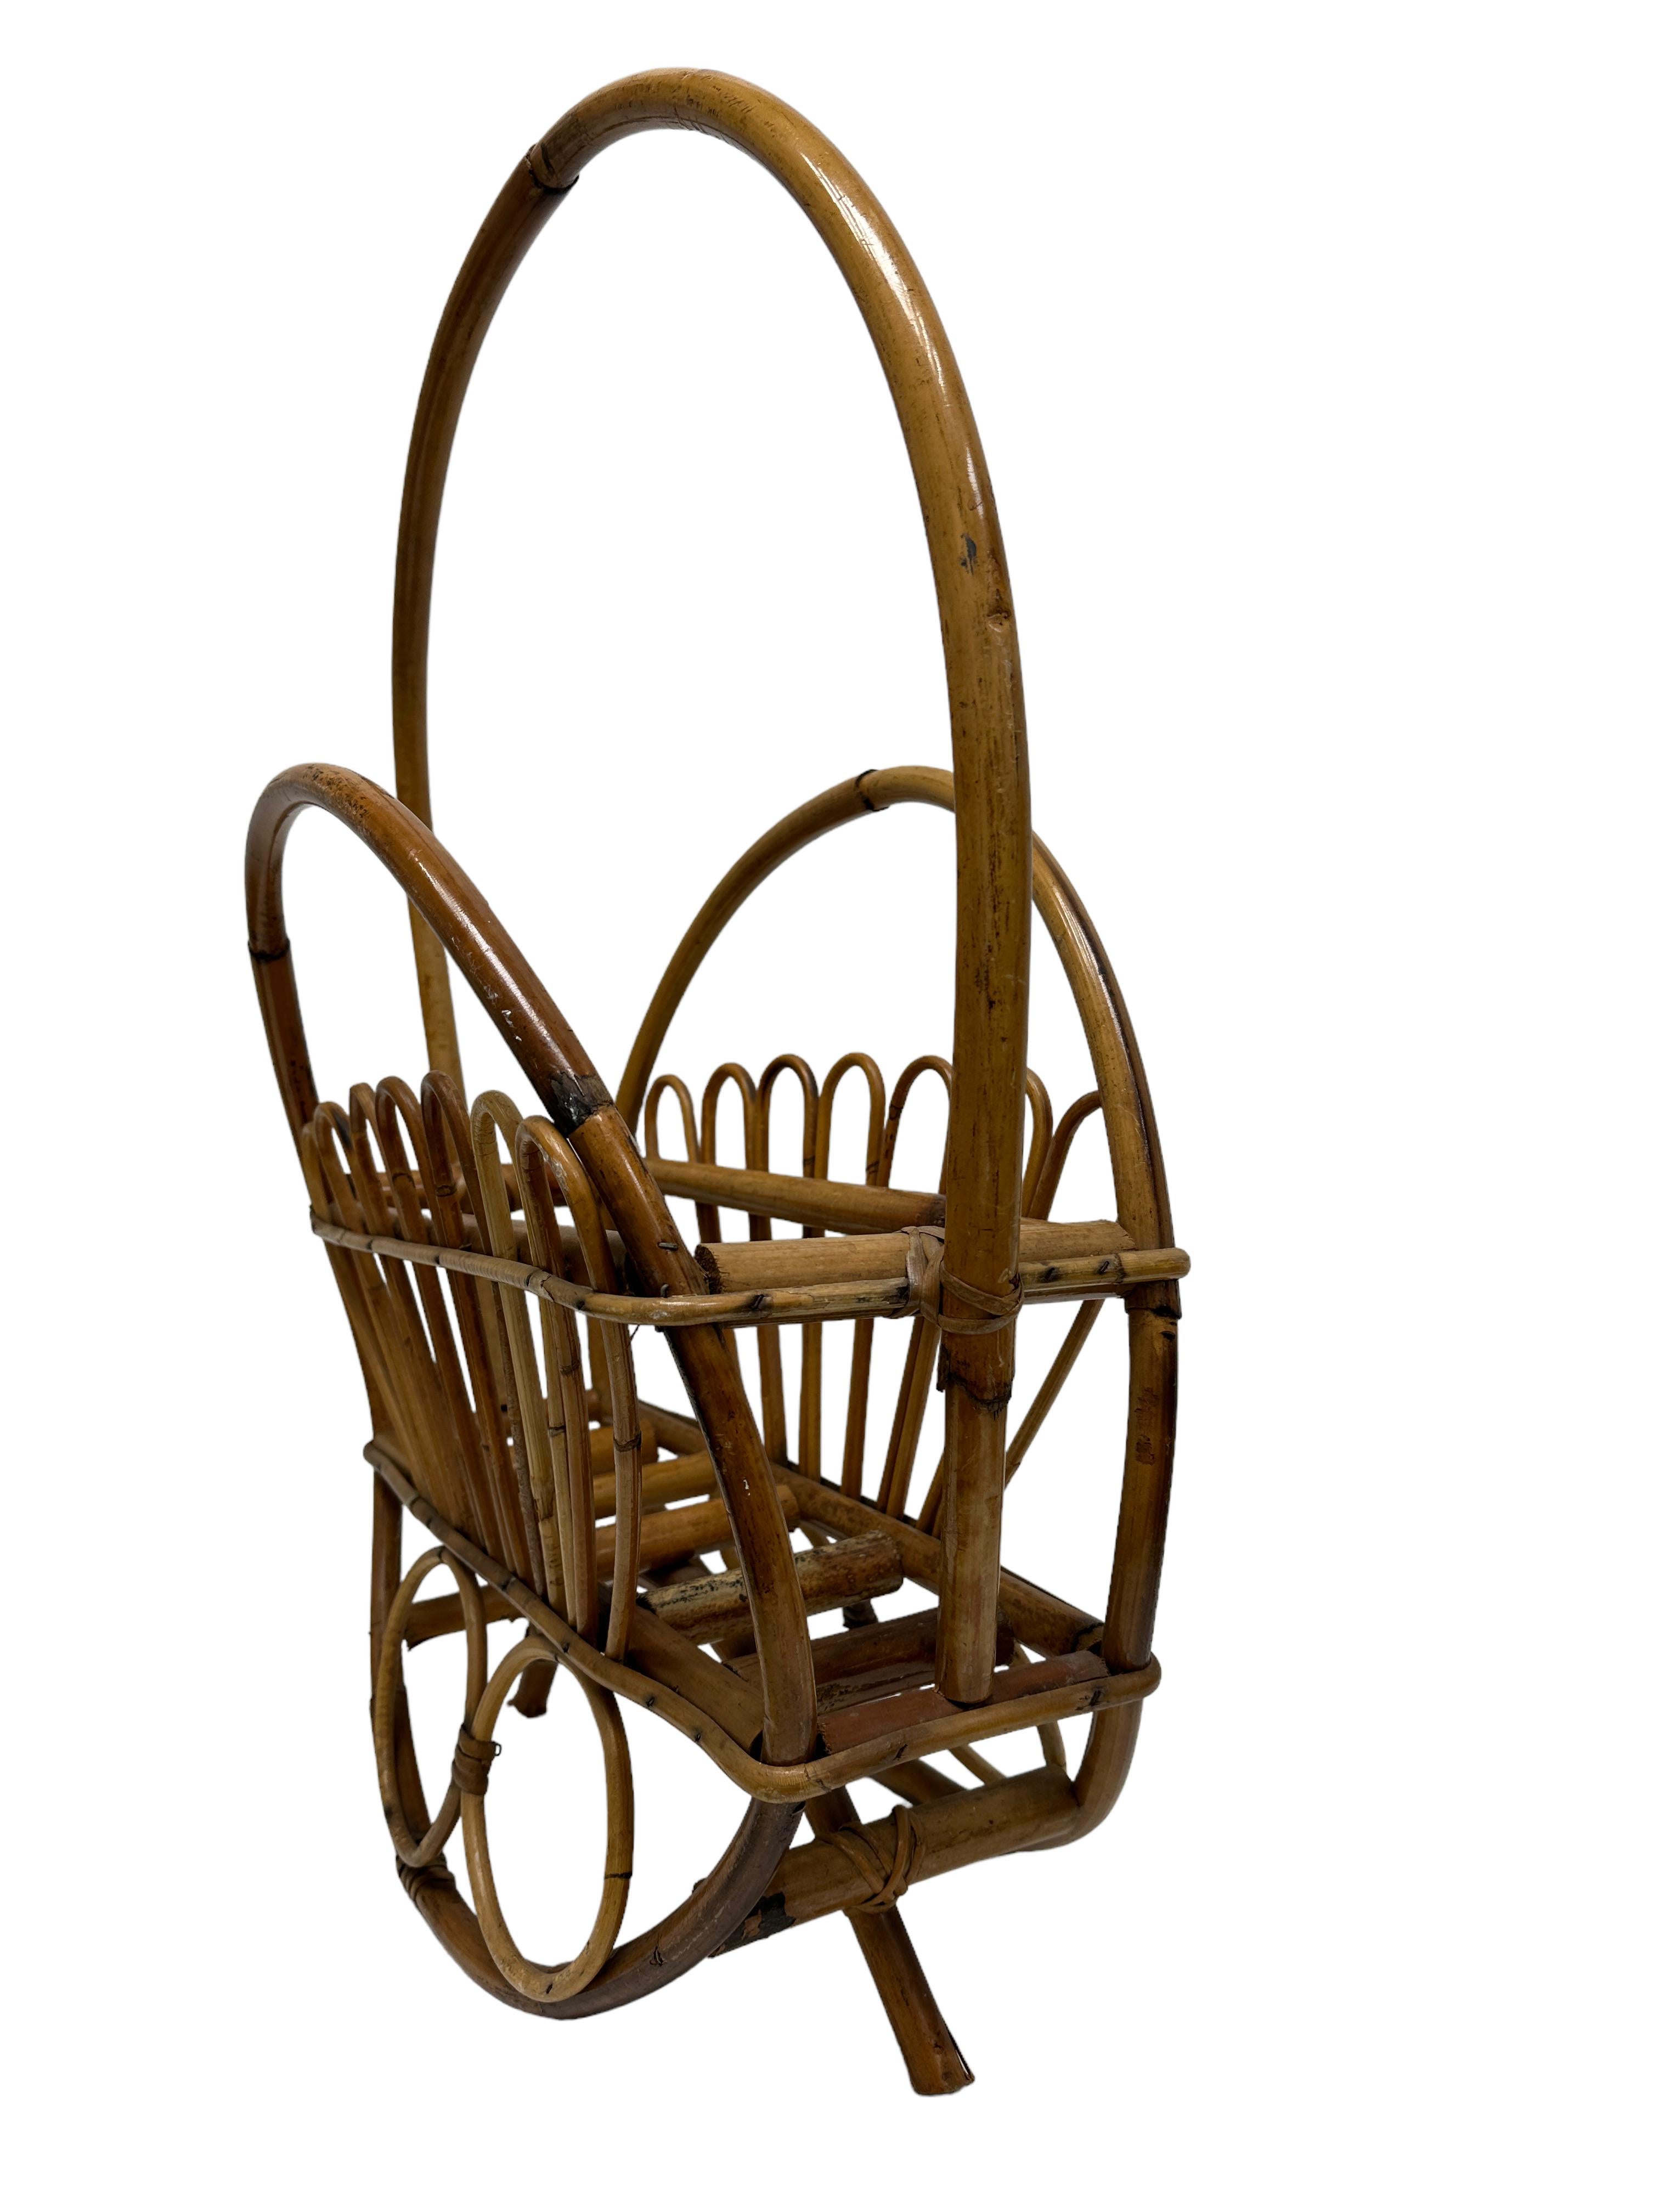 Hand-Crafted Beautiful Vivai del Sud Bamboo Wicker Magazine Rack Stand, 1970s, Italy For Sale